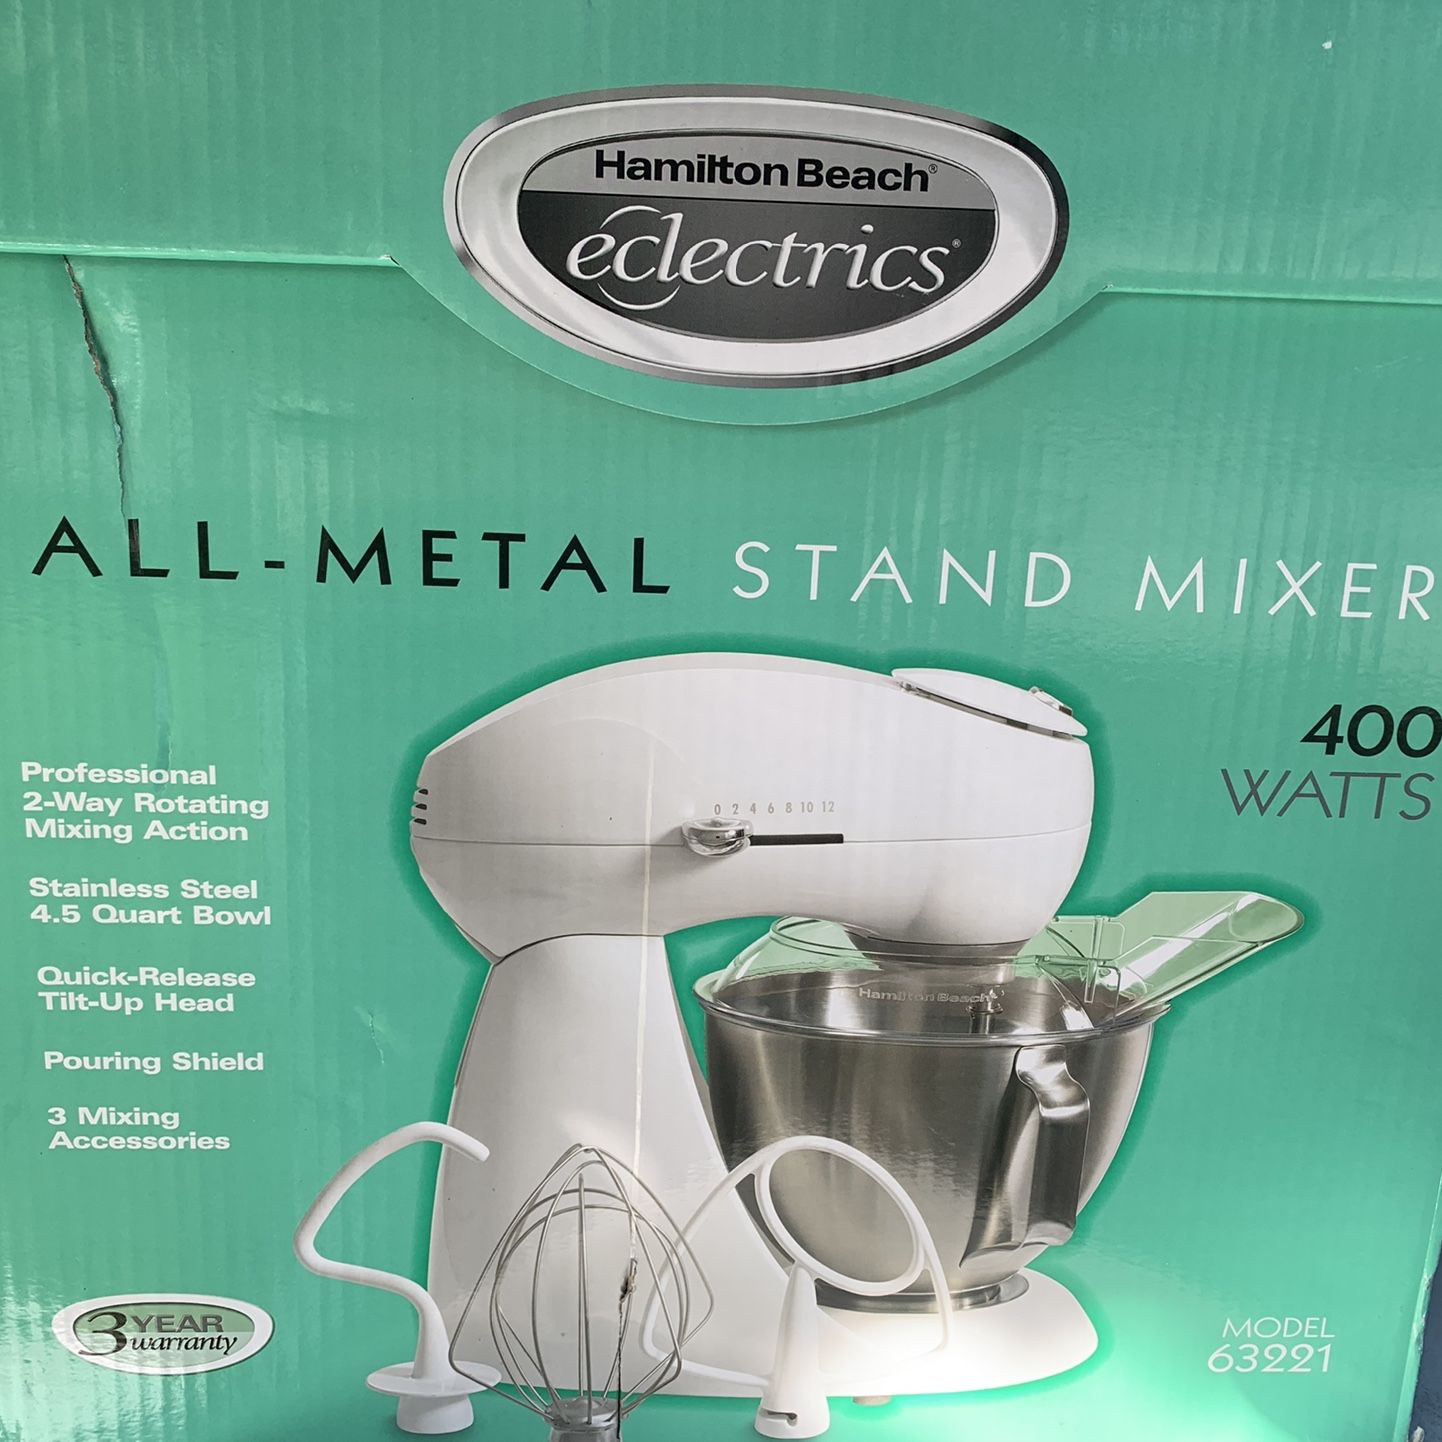 Breville Mixer for Sale in Bakersfield, CA - OfferUp